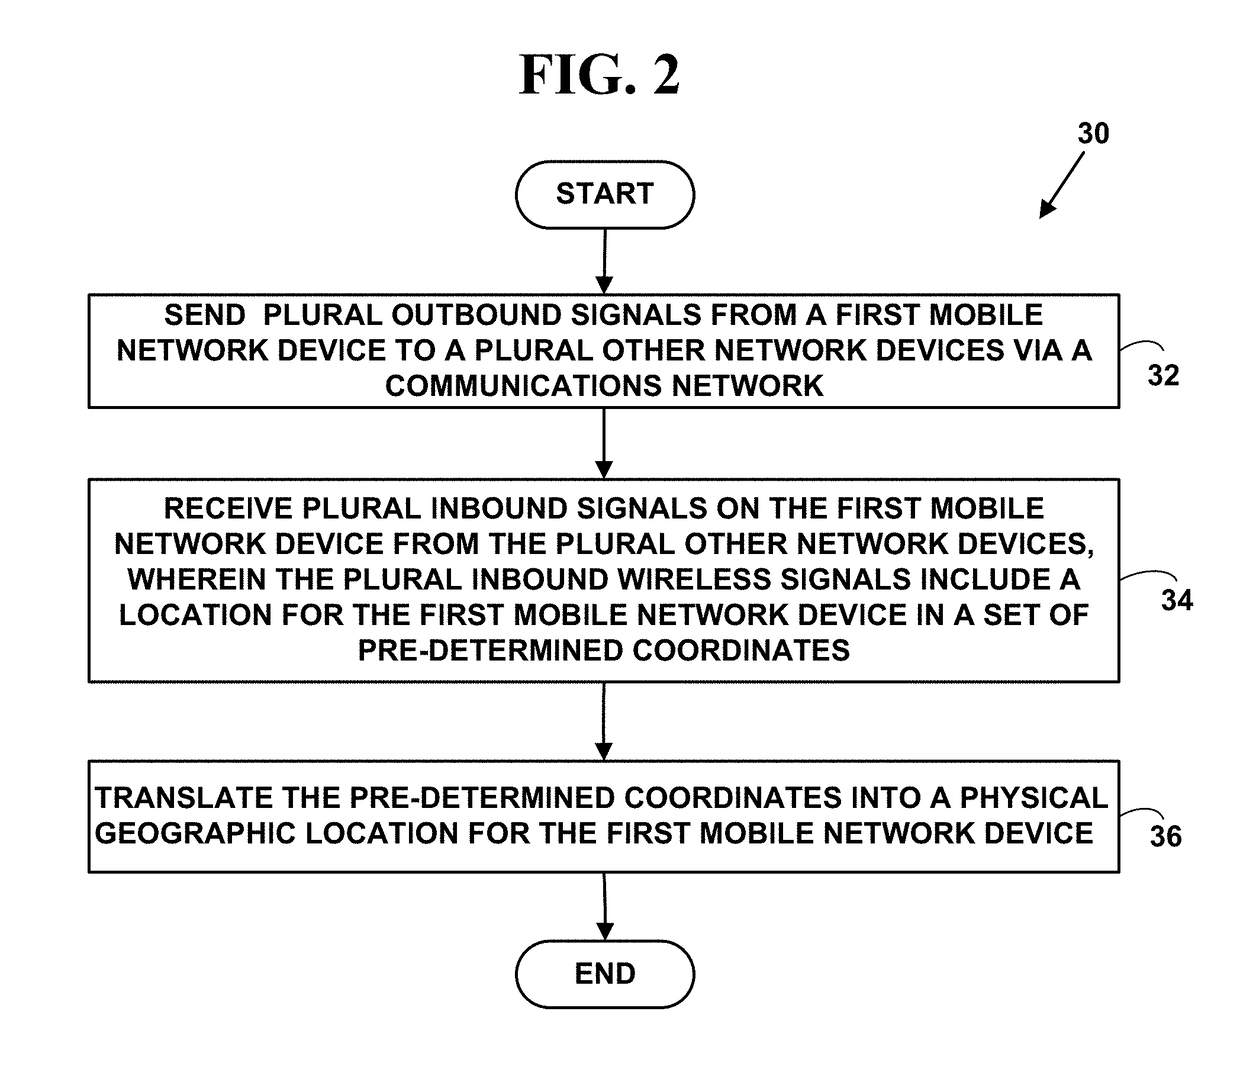 METHOD AND SYSTEM FOR AN EMERGENCY LOCATION INFORMATION SERVICE (E-LIS) FOR INTERNET OF THINGS (IoT) DEVICES